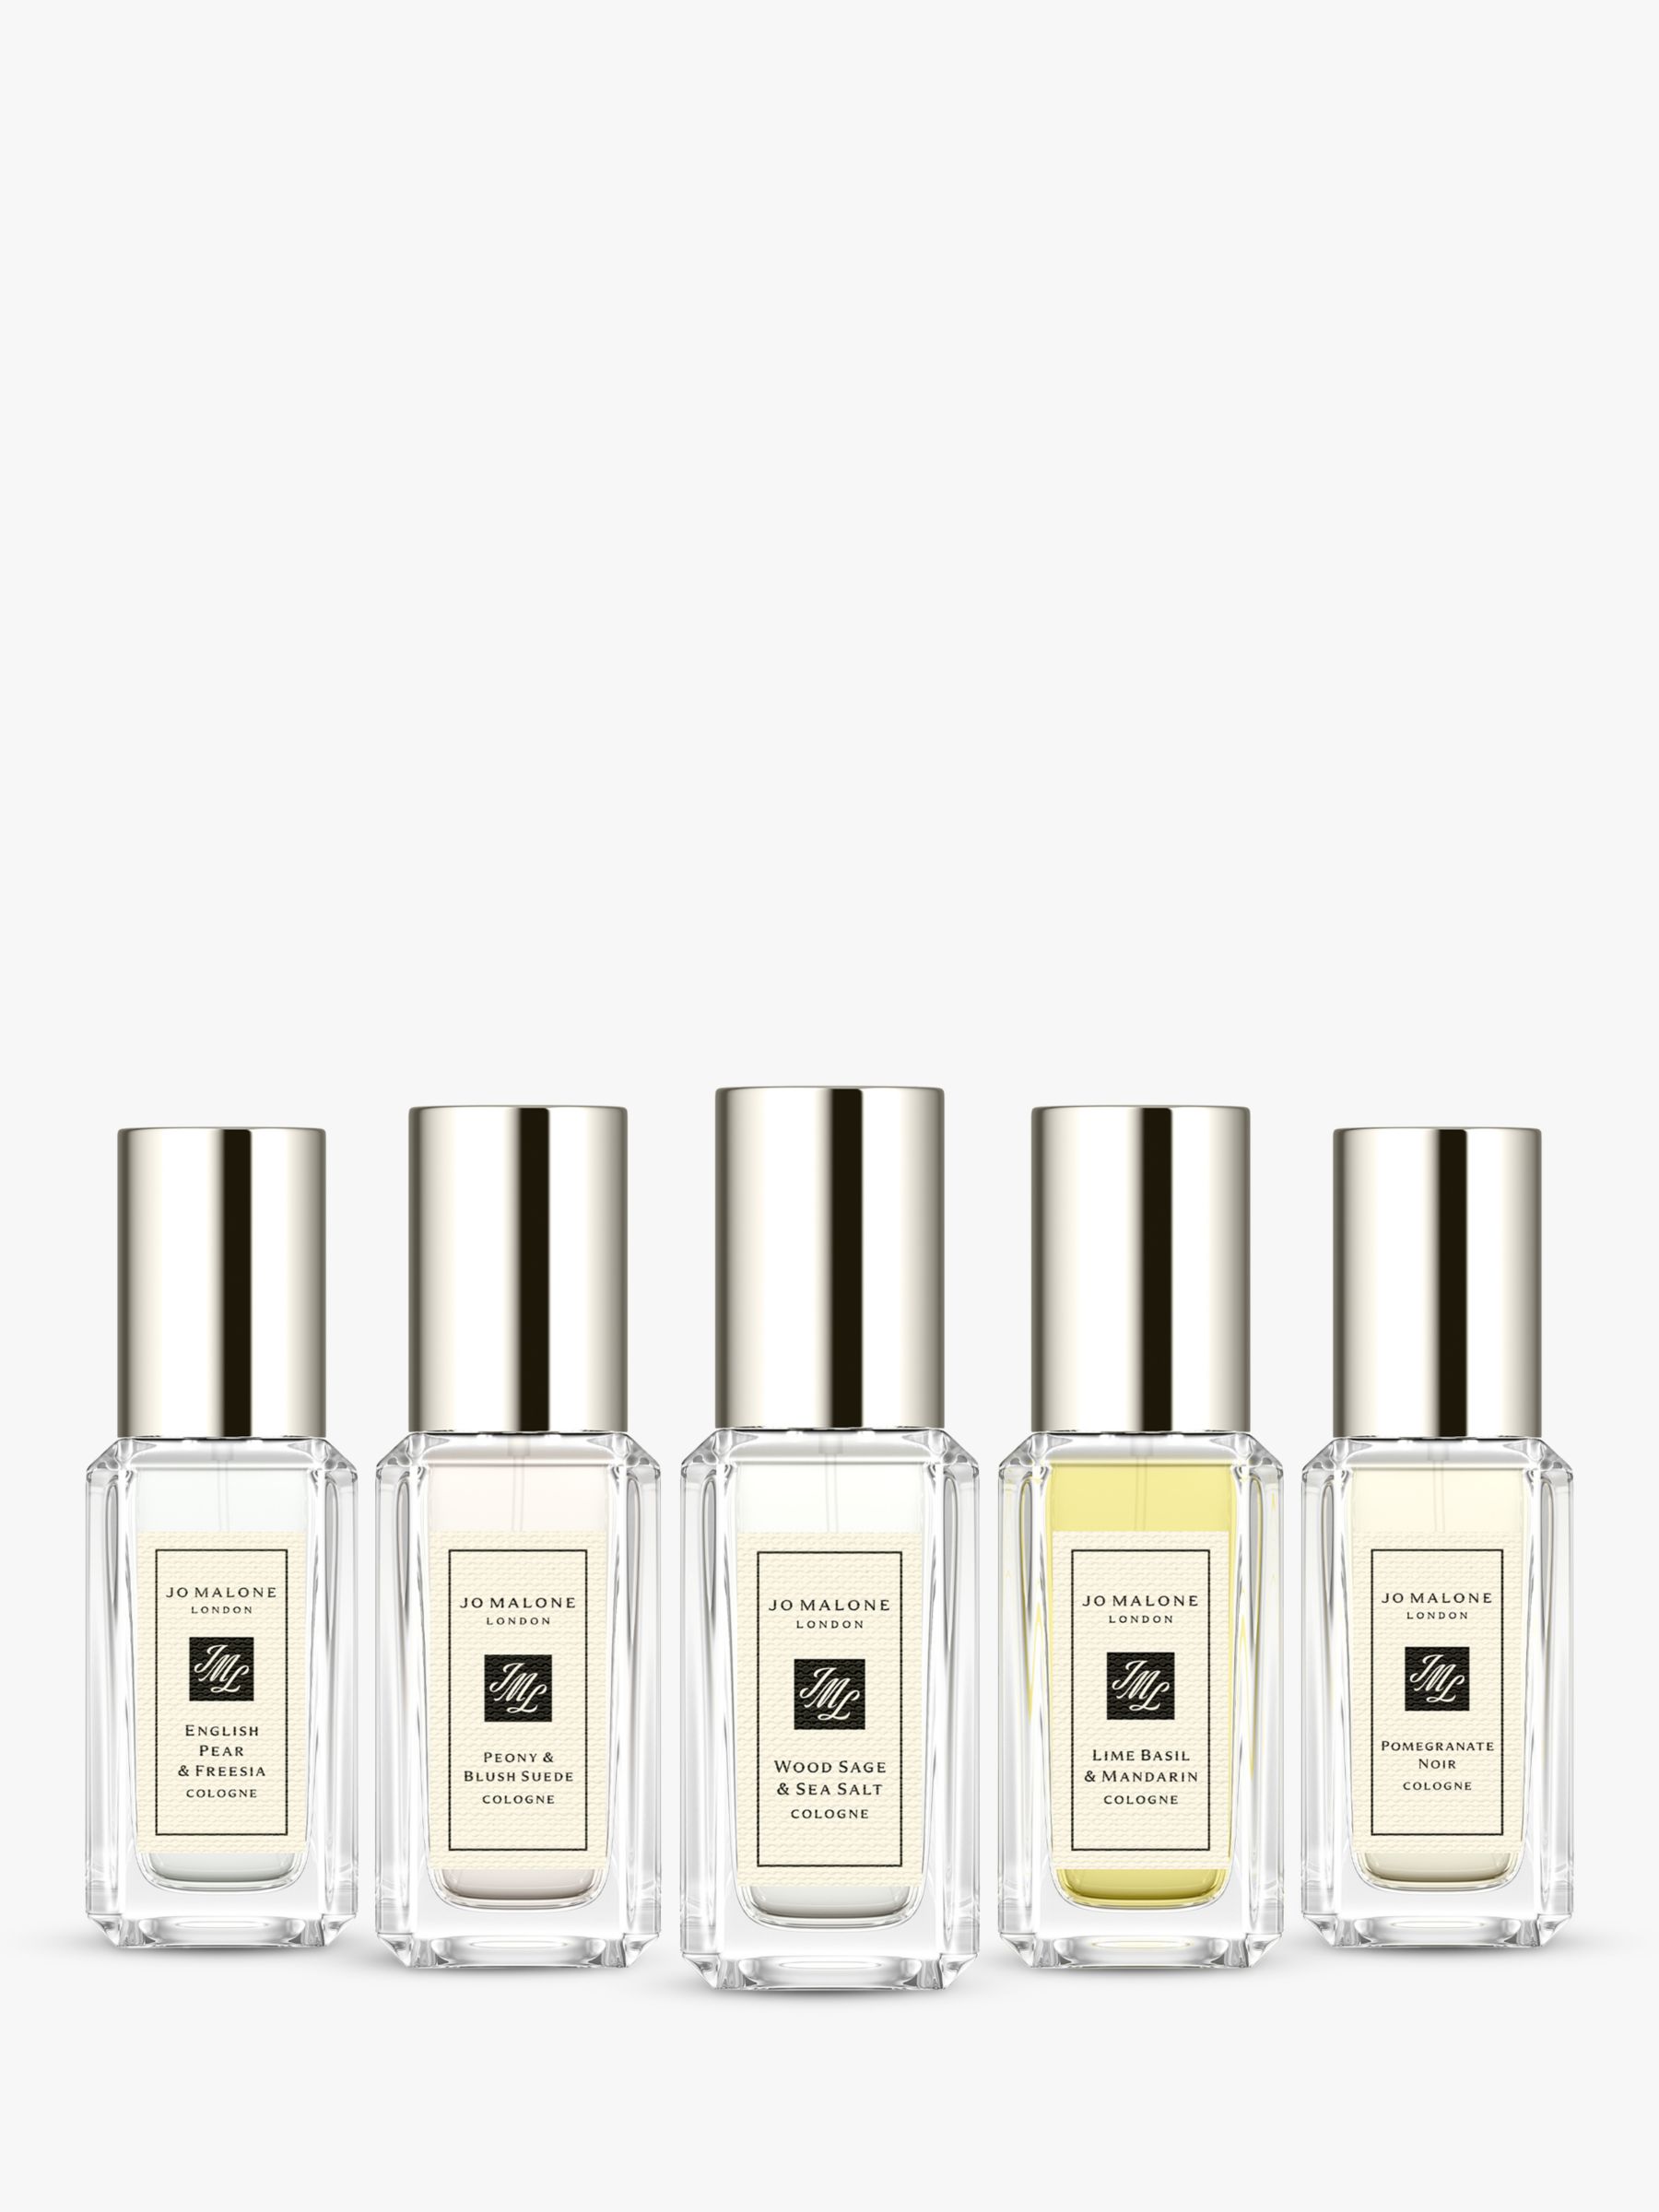 Jo Malone London Cologne Collection Fragrance Gift Set, 5 x 9ml 1